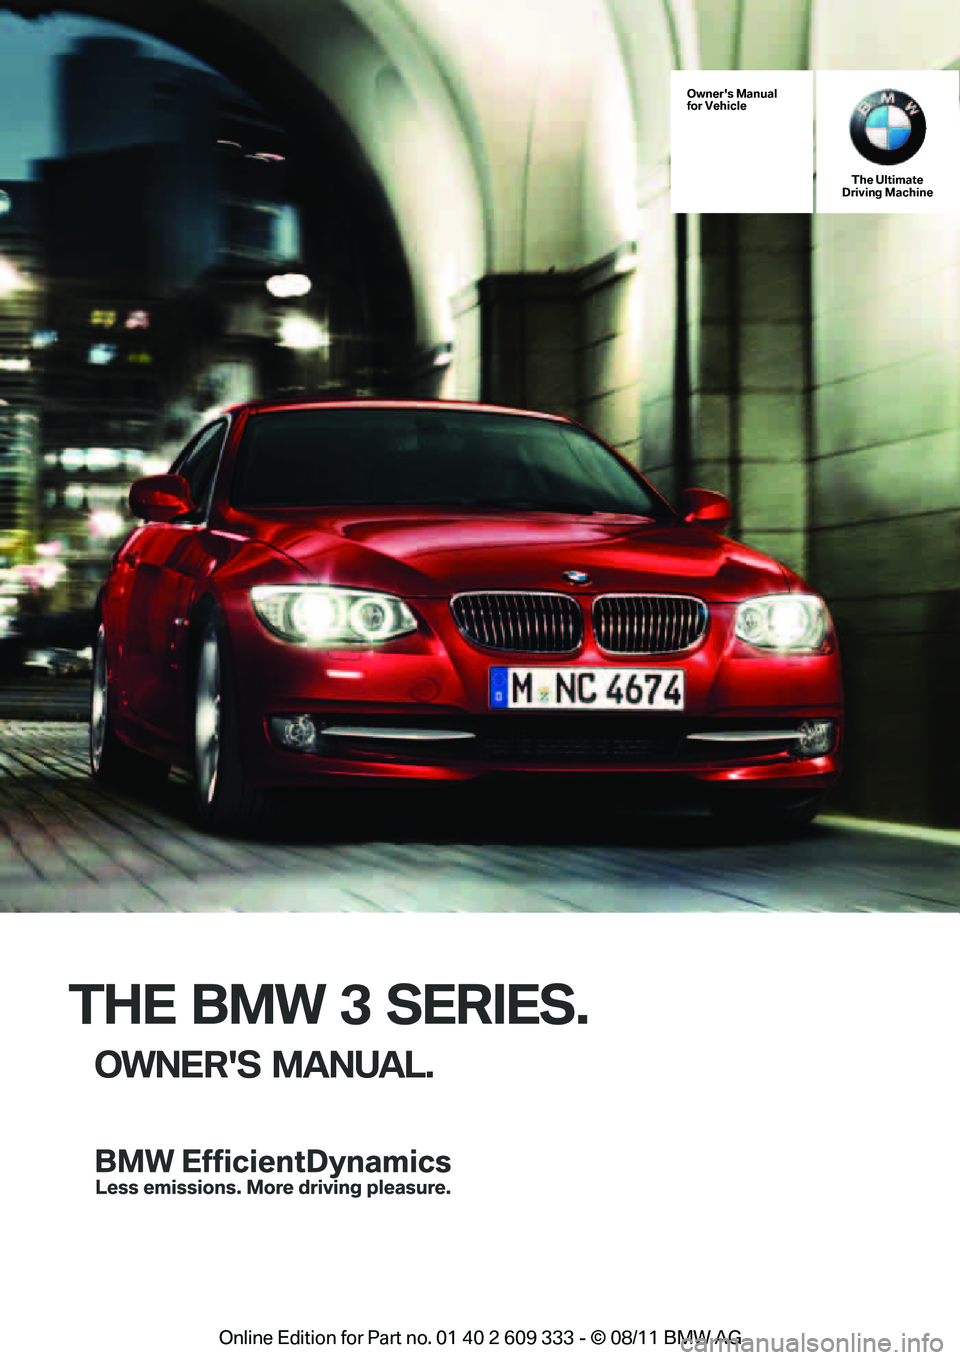 BMW 335I XDRIVE COUPE 2012  Owners Manual THE BMW 3 SERIES.
OWNERS MANUAL.
Owners Manual
for VehicleThe Ultimate
Driving Machine
Online  Edition  for Part  no. 01 40 2 609  333 - \251  08/11  BMW AG  